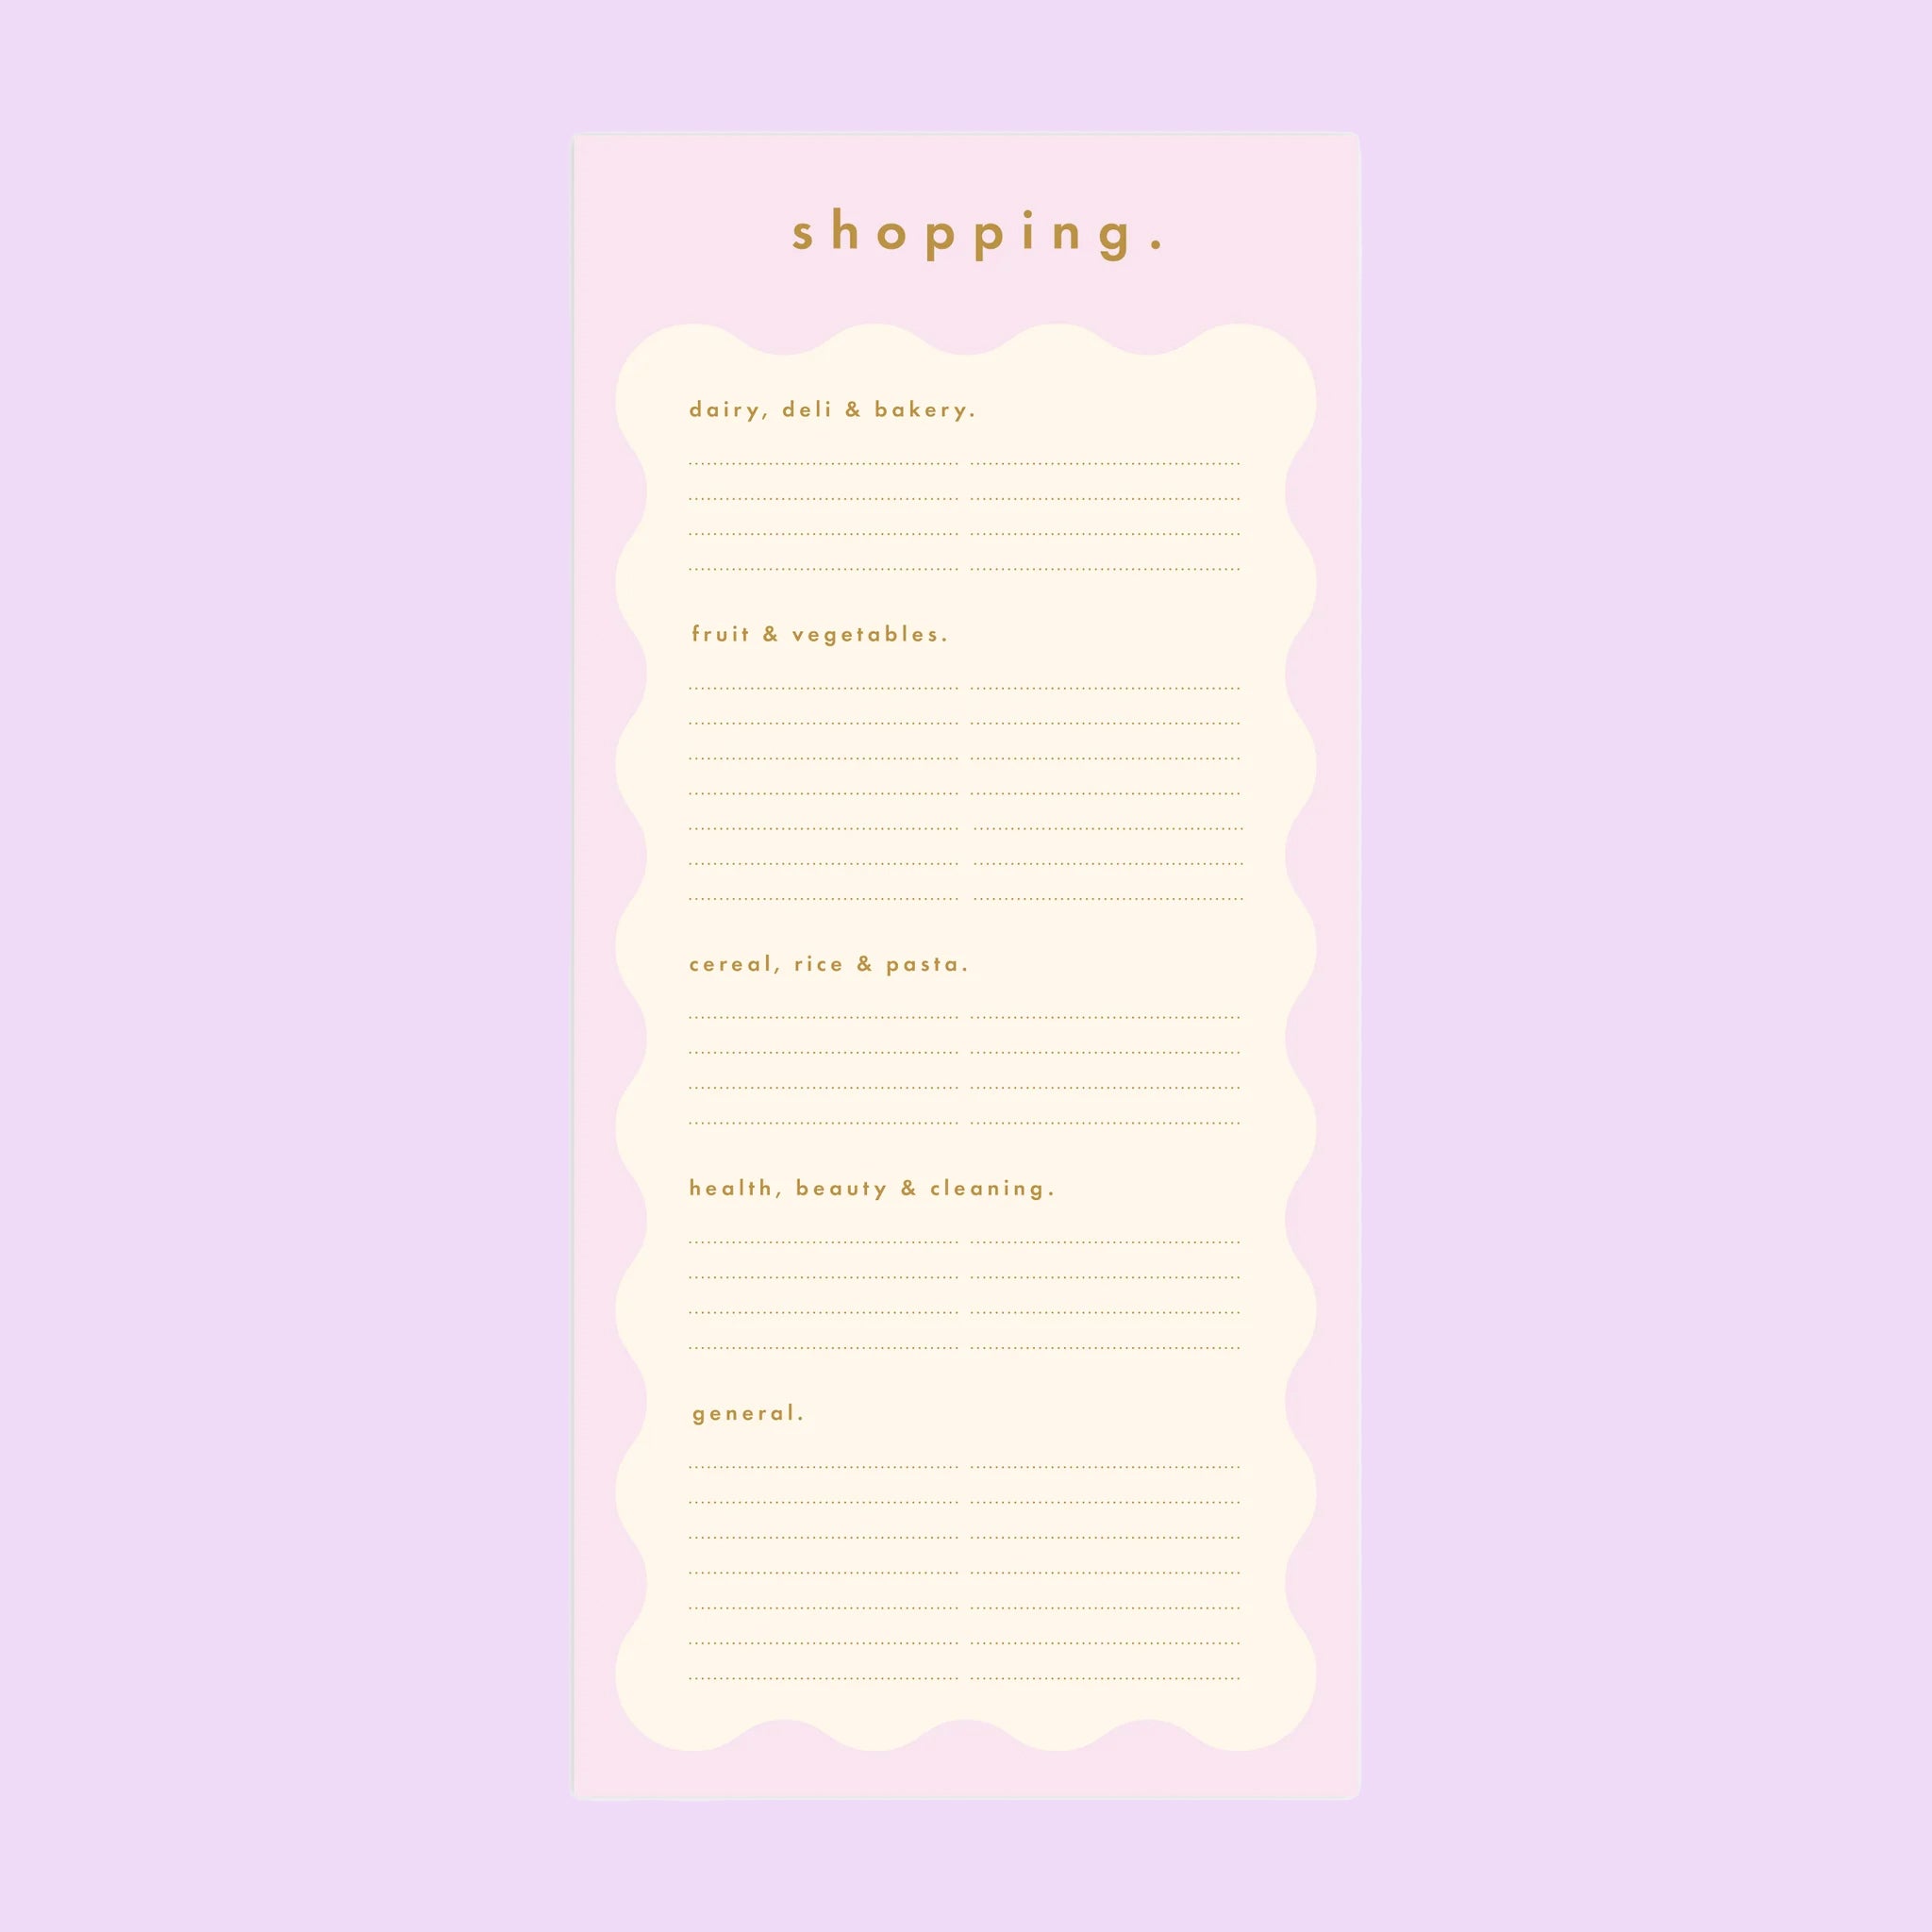 On a purple background is a lilac purple and ivory shopping notepad with a wavy design around the border and text that reads, &quot;shopping.&quot;, &quot;dairy, deli &amp; bakery.&quot;, &quot;fruit &amp; vegtables.&quot;, &quot;cereal, rice &amp; pasta.&quot;, &quot;health, beauty &amp; cleaning&quot; and &quot;general.&quot;. 